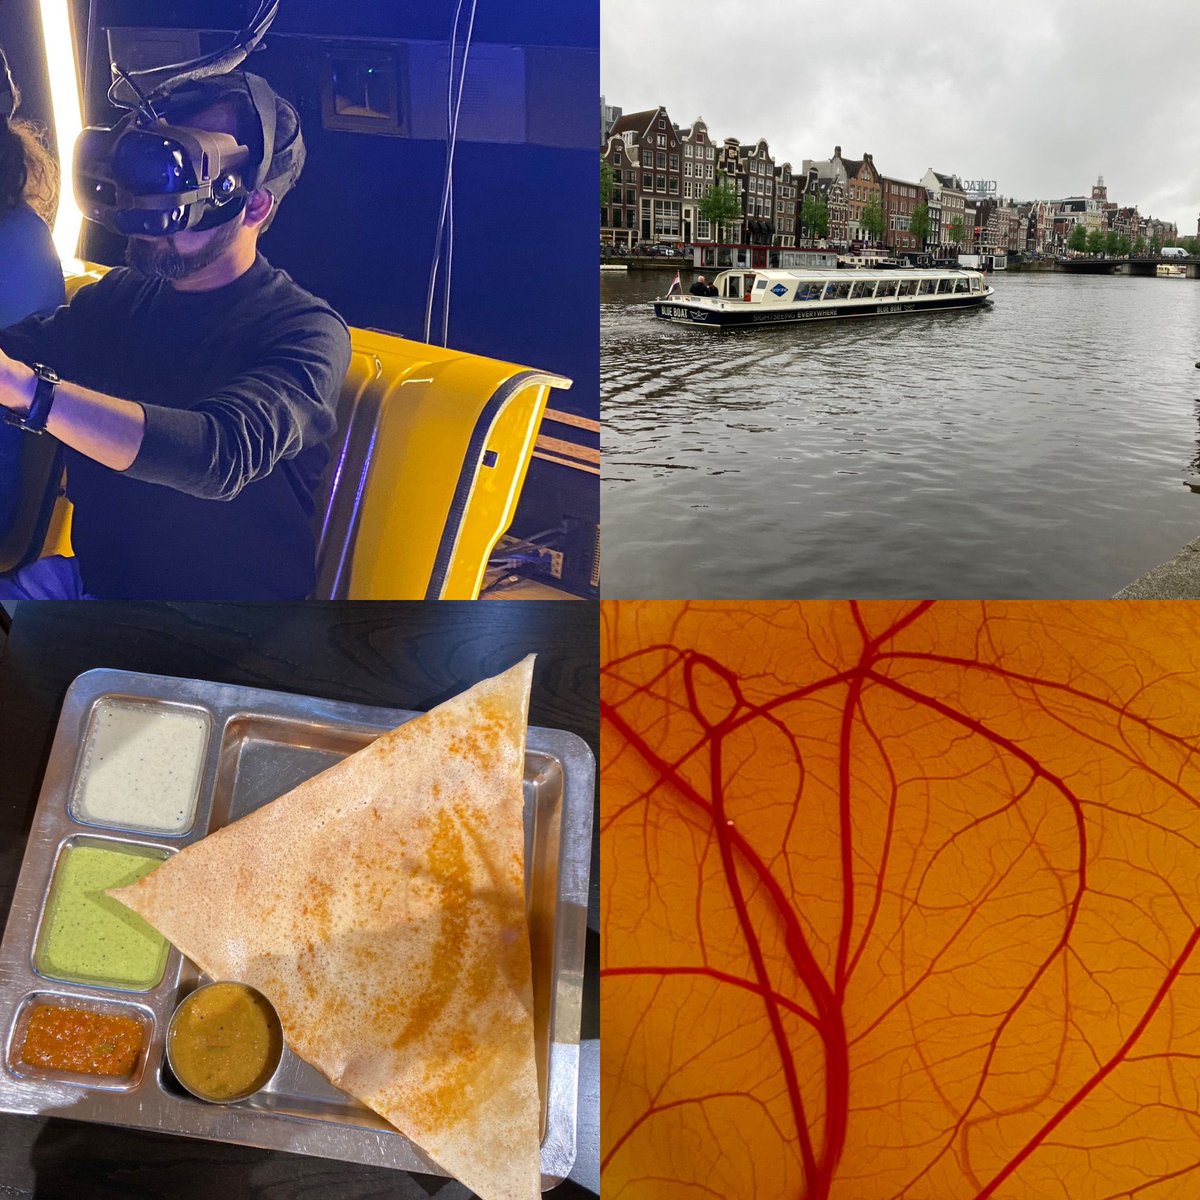 Exited my 33rd year in 🇳🇱 Memorable dinners with my friends, my PhD supervisor & my ❤️. Enjoyed VR games, canal tours, city walks, & collaboration visits. Entered the 34th year with my paper acceptance, finalizing the book, and a grant proposal. More good news soon! 🎉